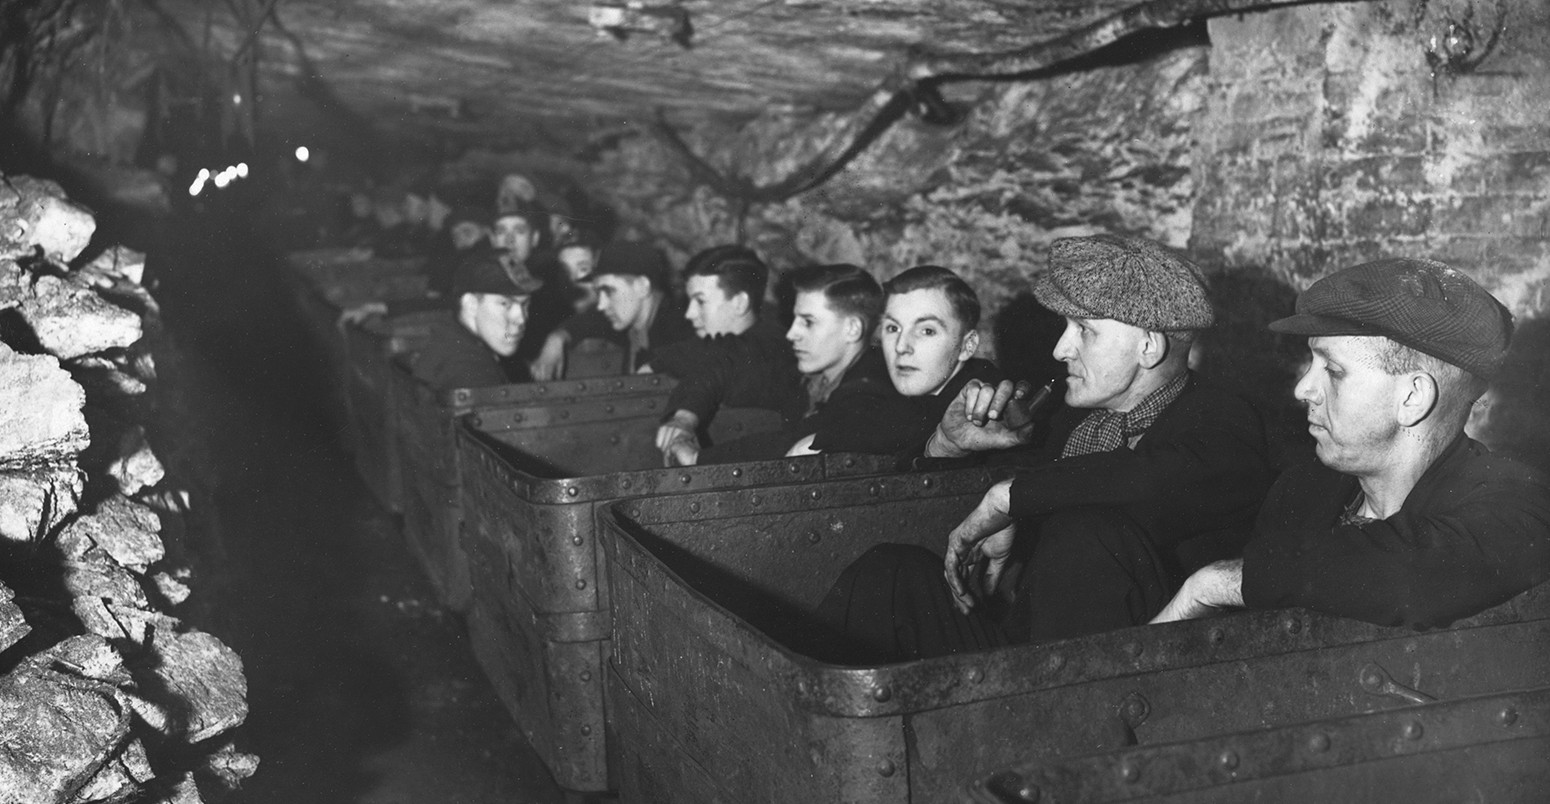 Coal Miners in Ore Cars Ready for Work in 1939